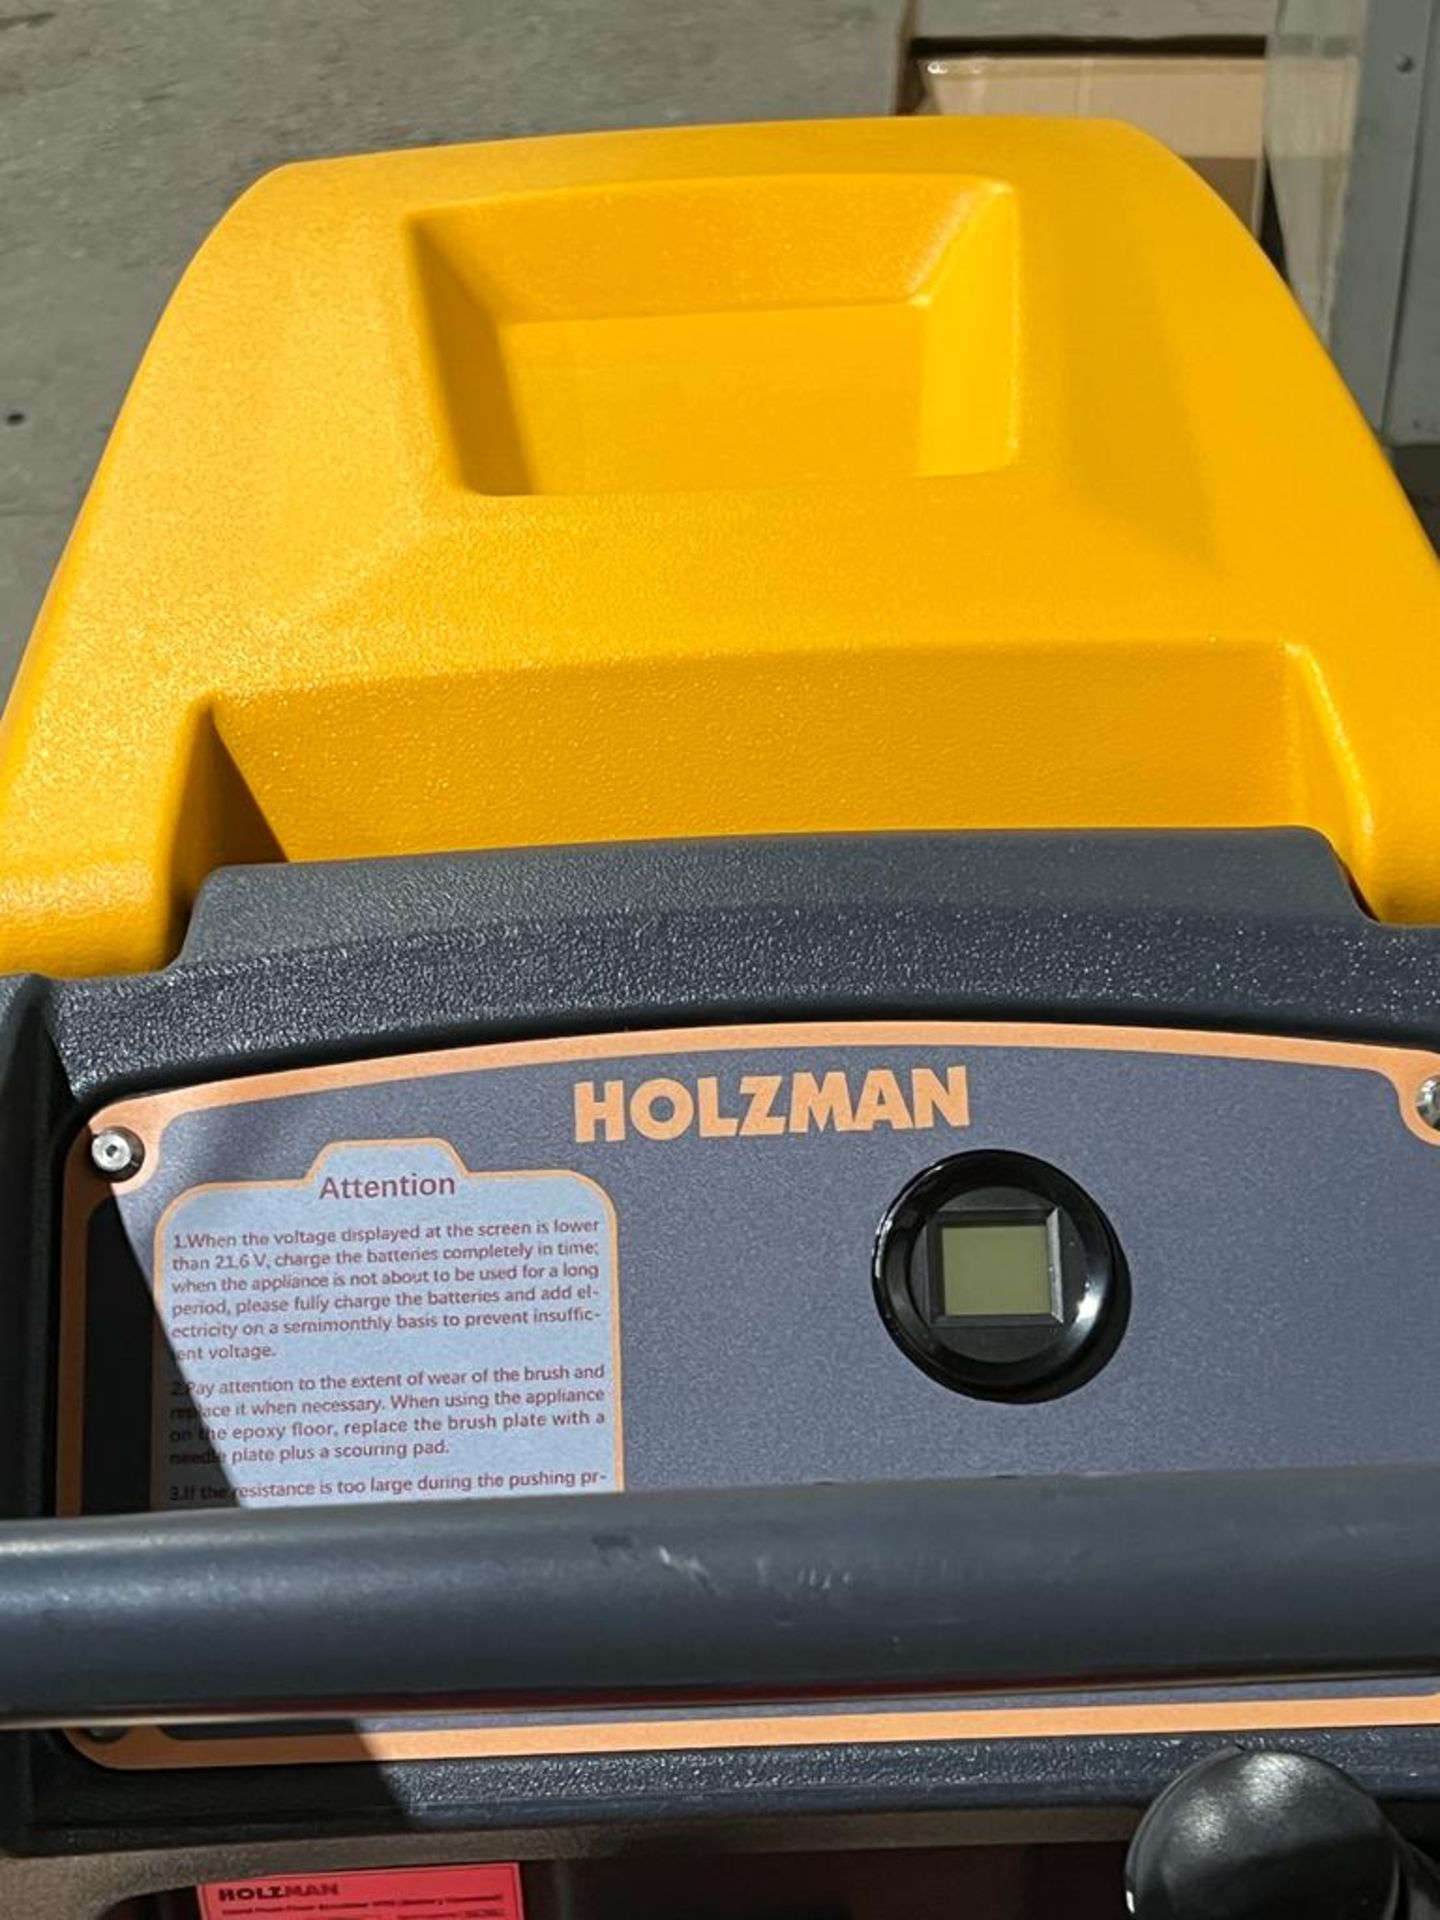 Holzman MINT Walk Behind Floor Sweeper Scrubber Unit model M50 - BRAND NEW with extra pads, digital - Image 4 of 7